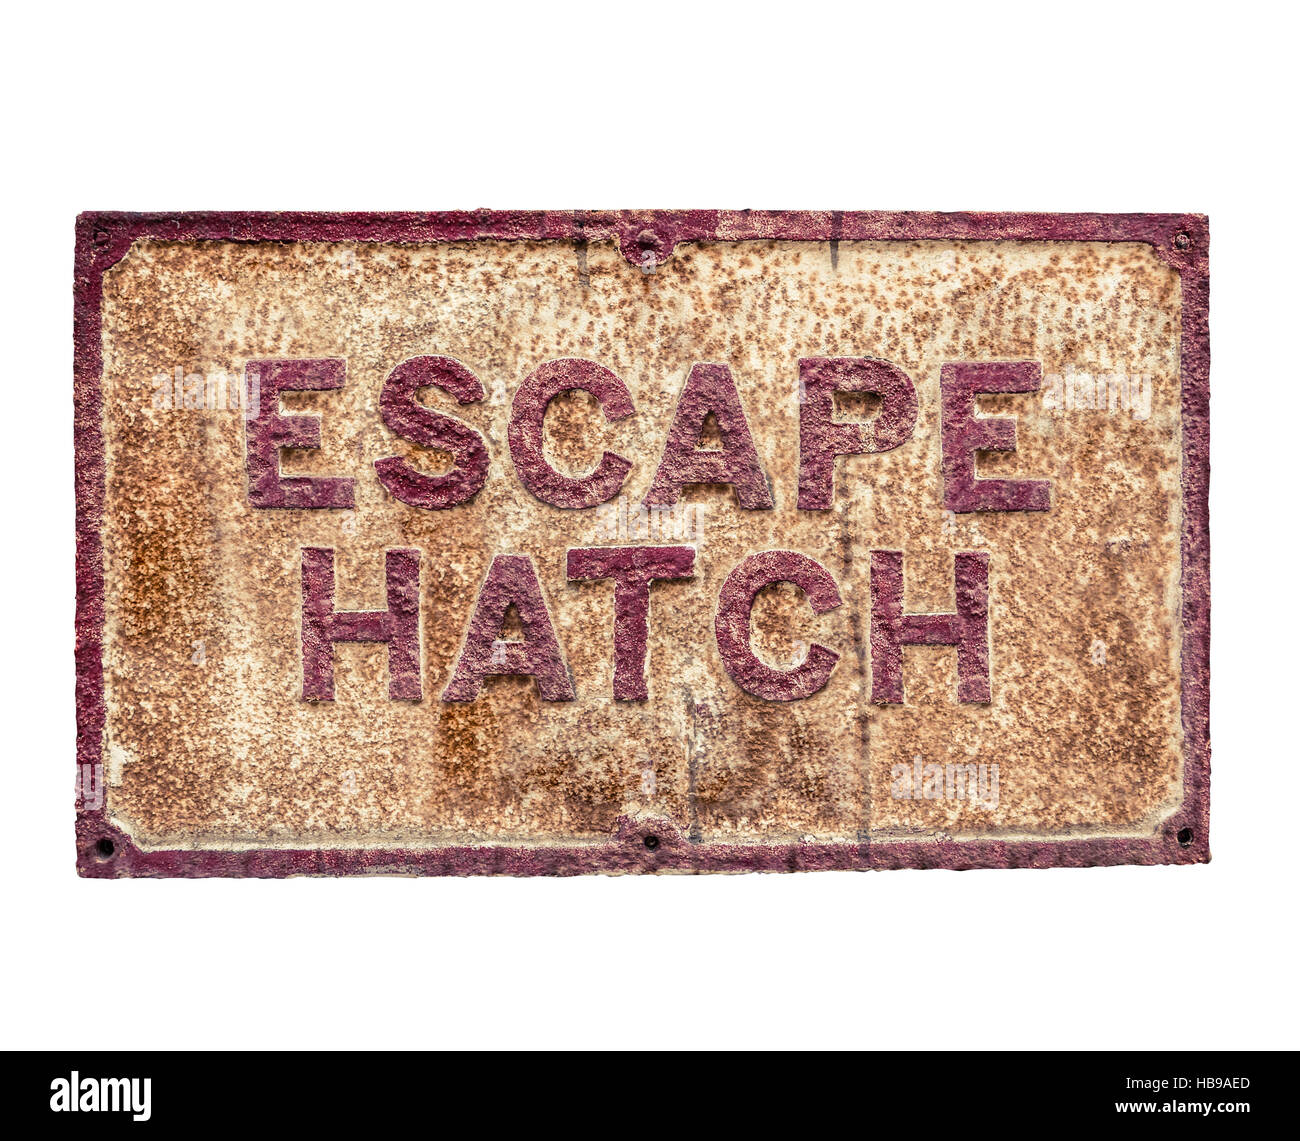 Rusty Emergency Escape Hatch Sign Stock Photo